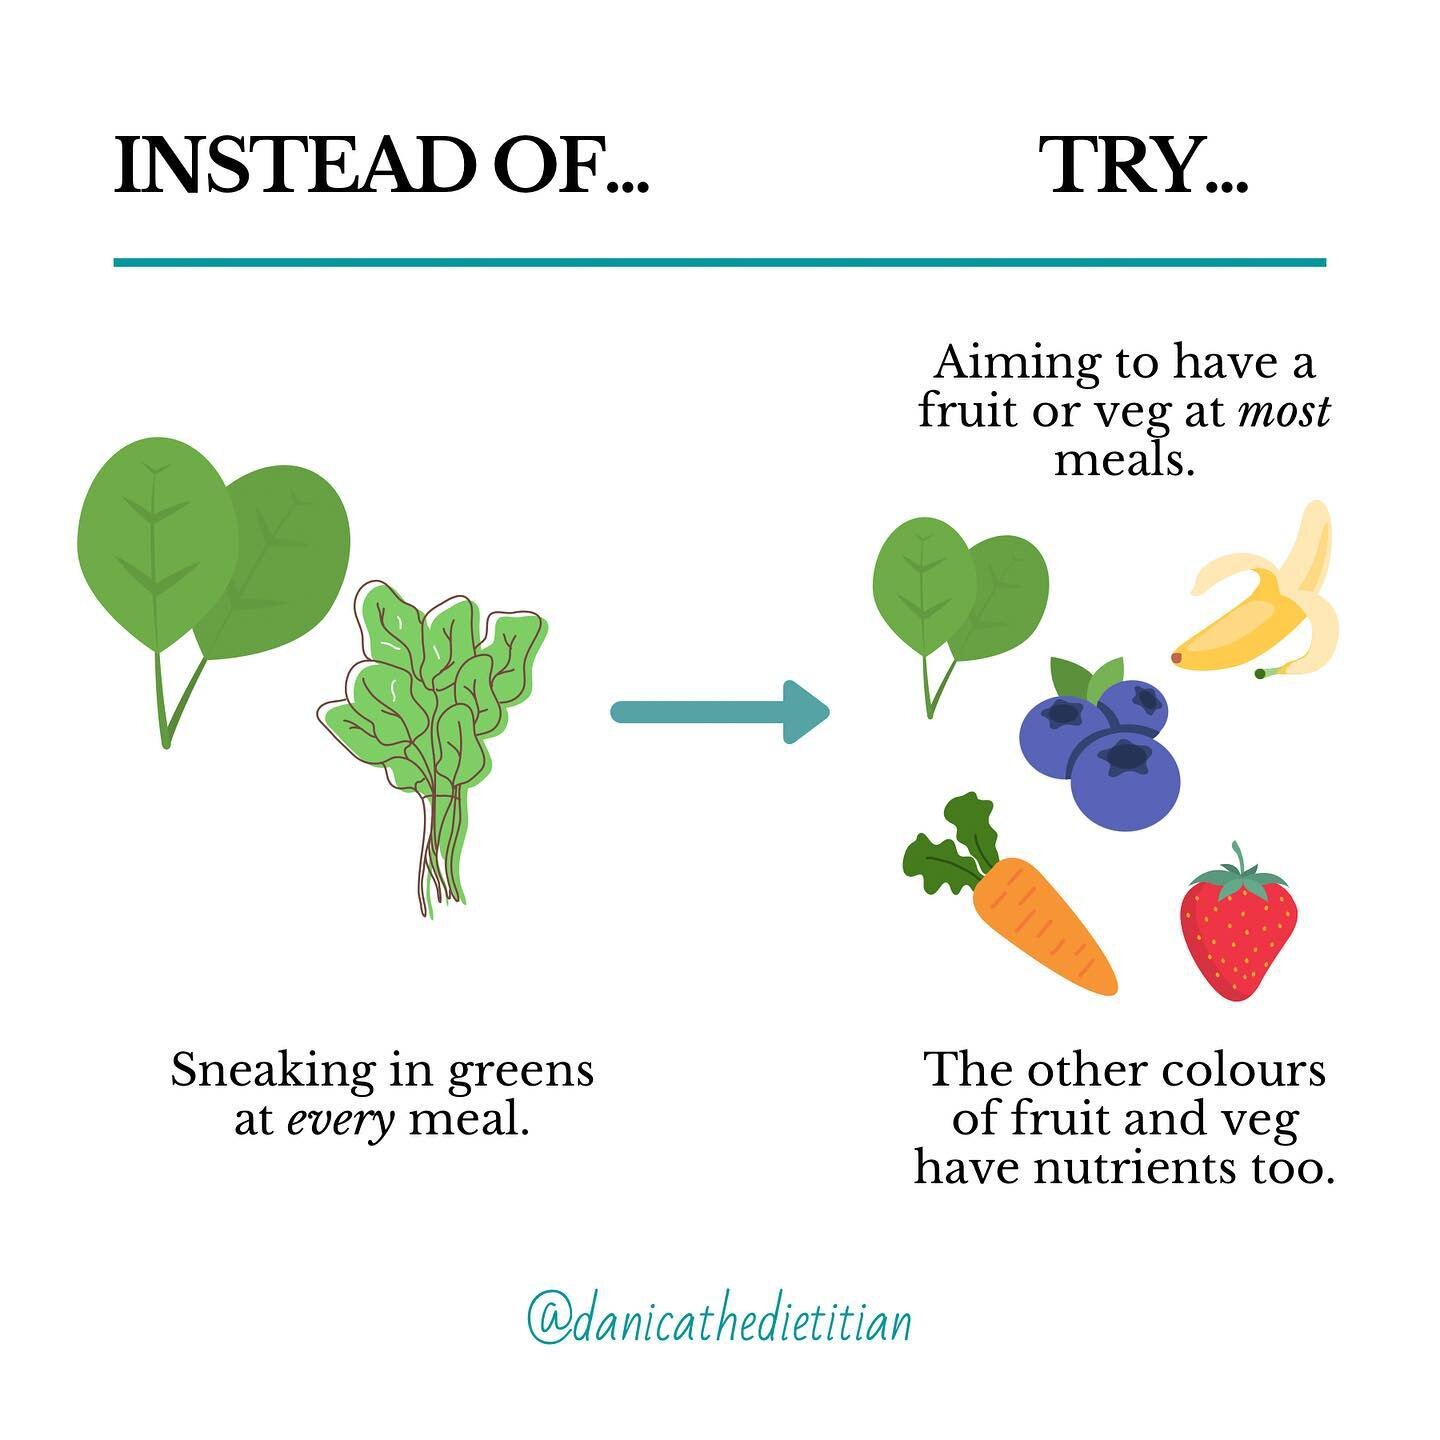 I recently saw a post that challenged people to &ldquo;sneak&rdquo; greens into every meal for a month. Here&rsquo;s why I wouldn&rsquo;t recommend that ⤵️

It encourages an ALL or NOTHING approach to eating. Finding a way to add greens to every sing